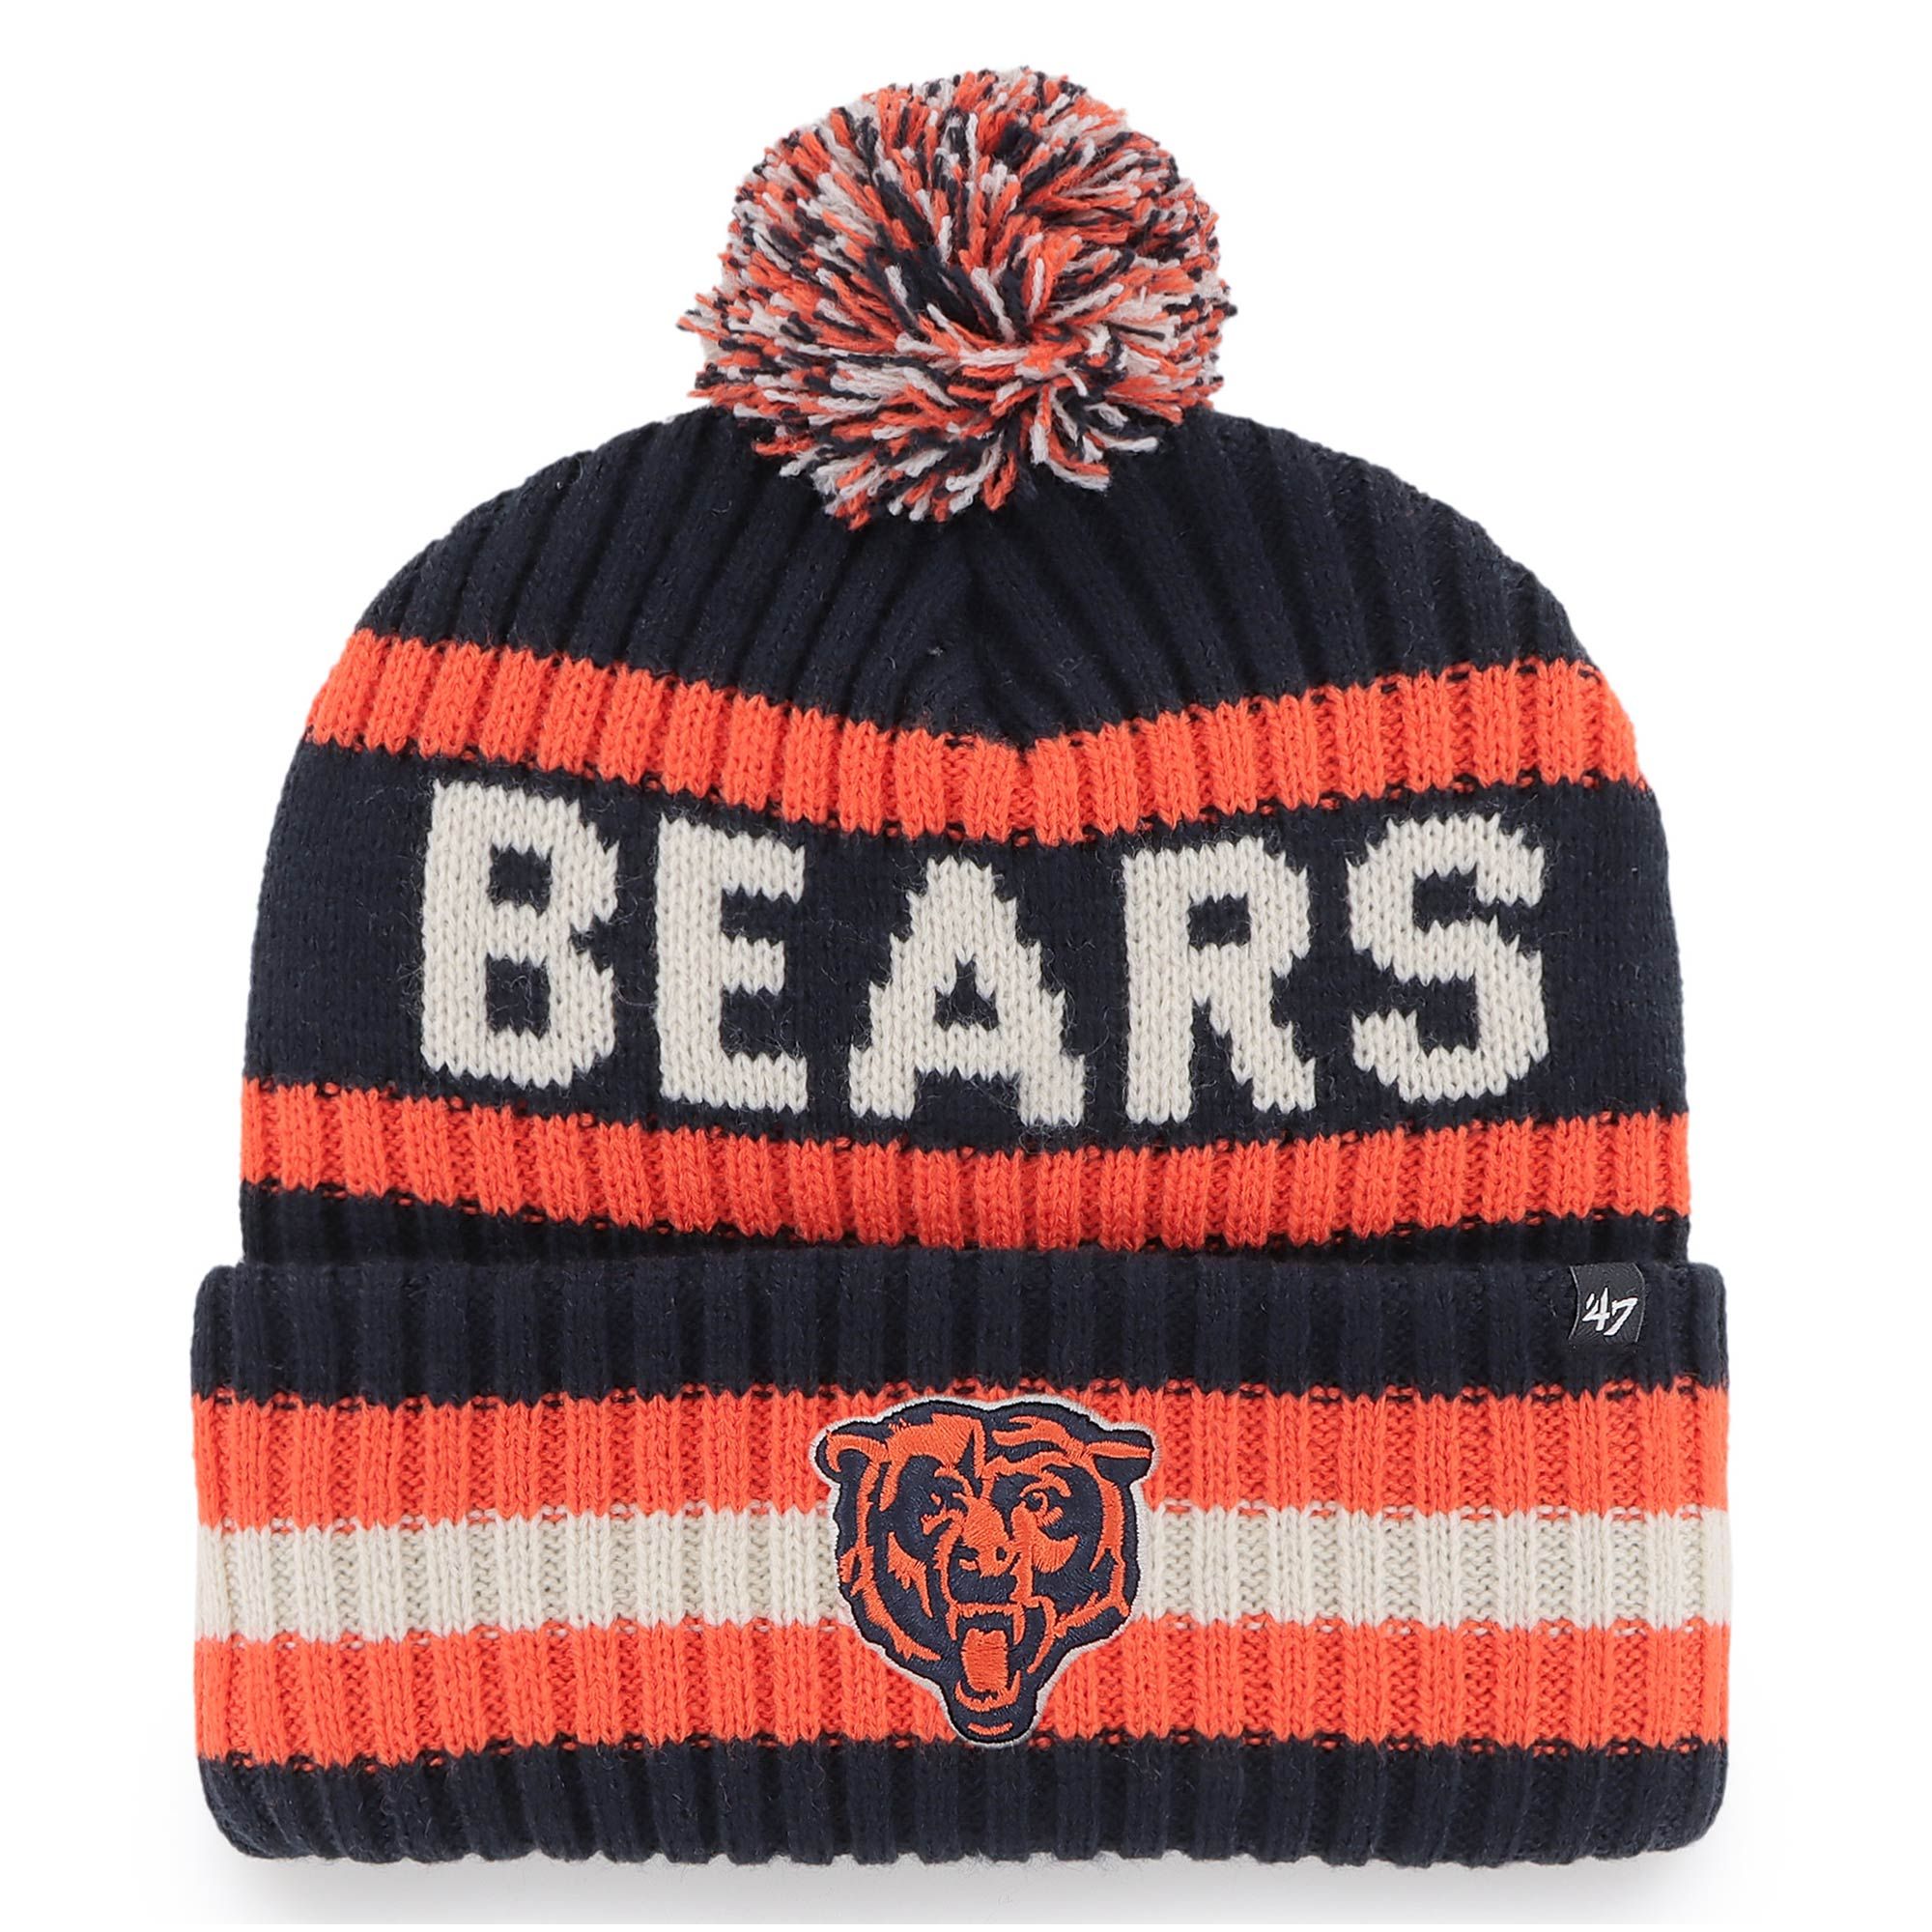 Men's Chicago Bears '47 Navy Bering Cuffed Knit Hat with Pom | NFL Shop